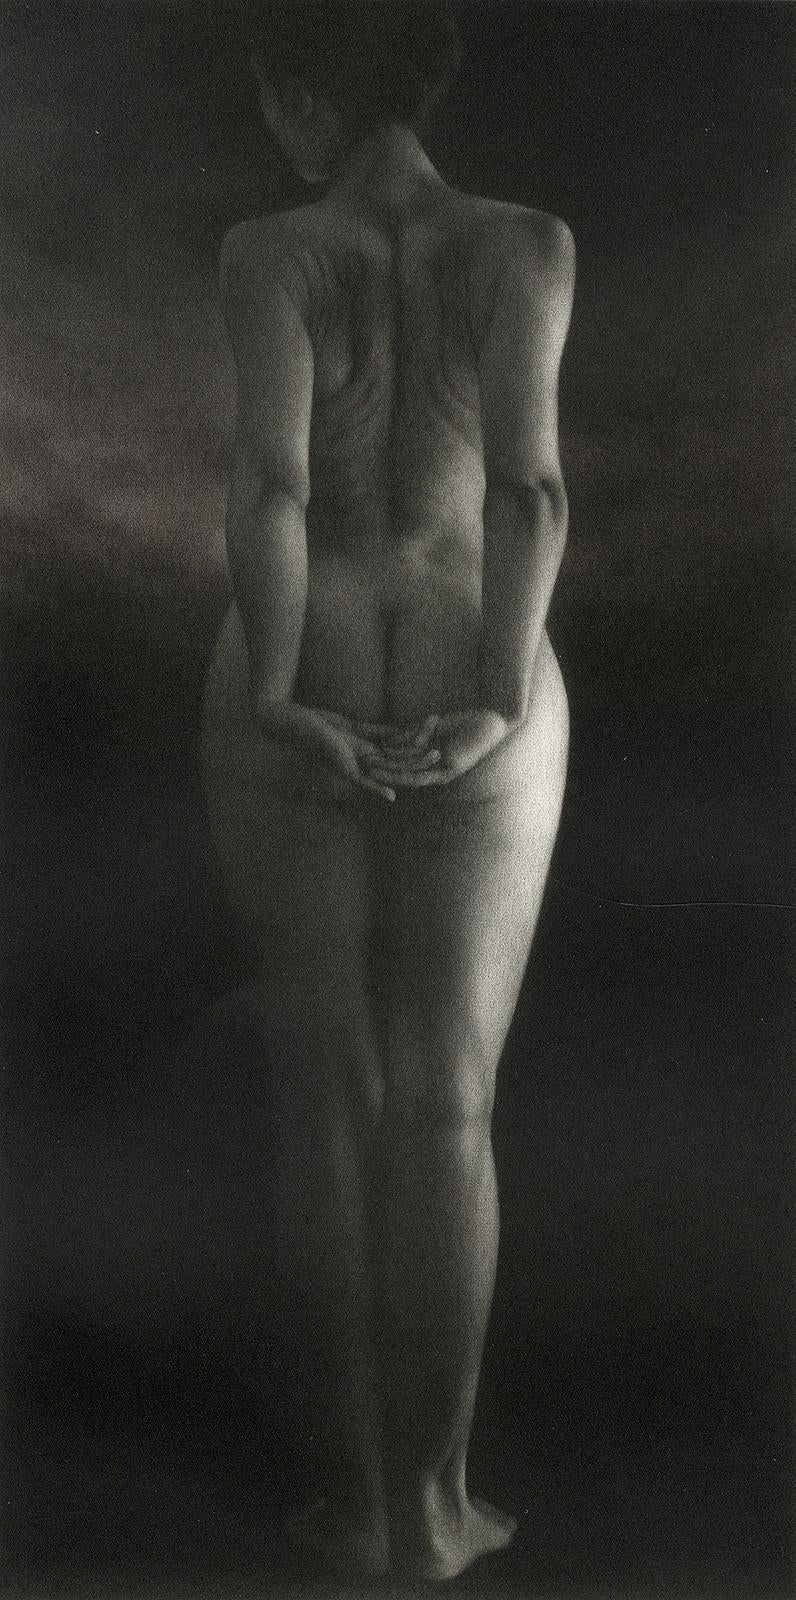 Mikio Watanabe Nude Print - Crepuscule (literally means Dusk. Standing young nude woman facing away)